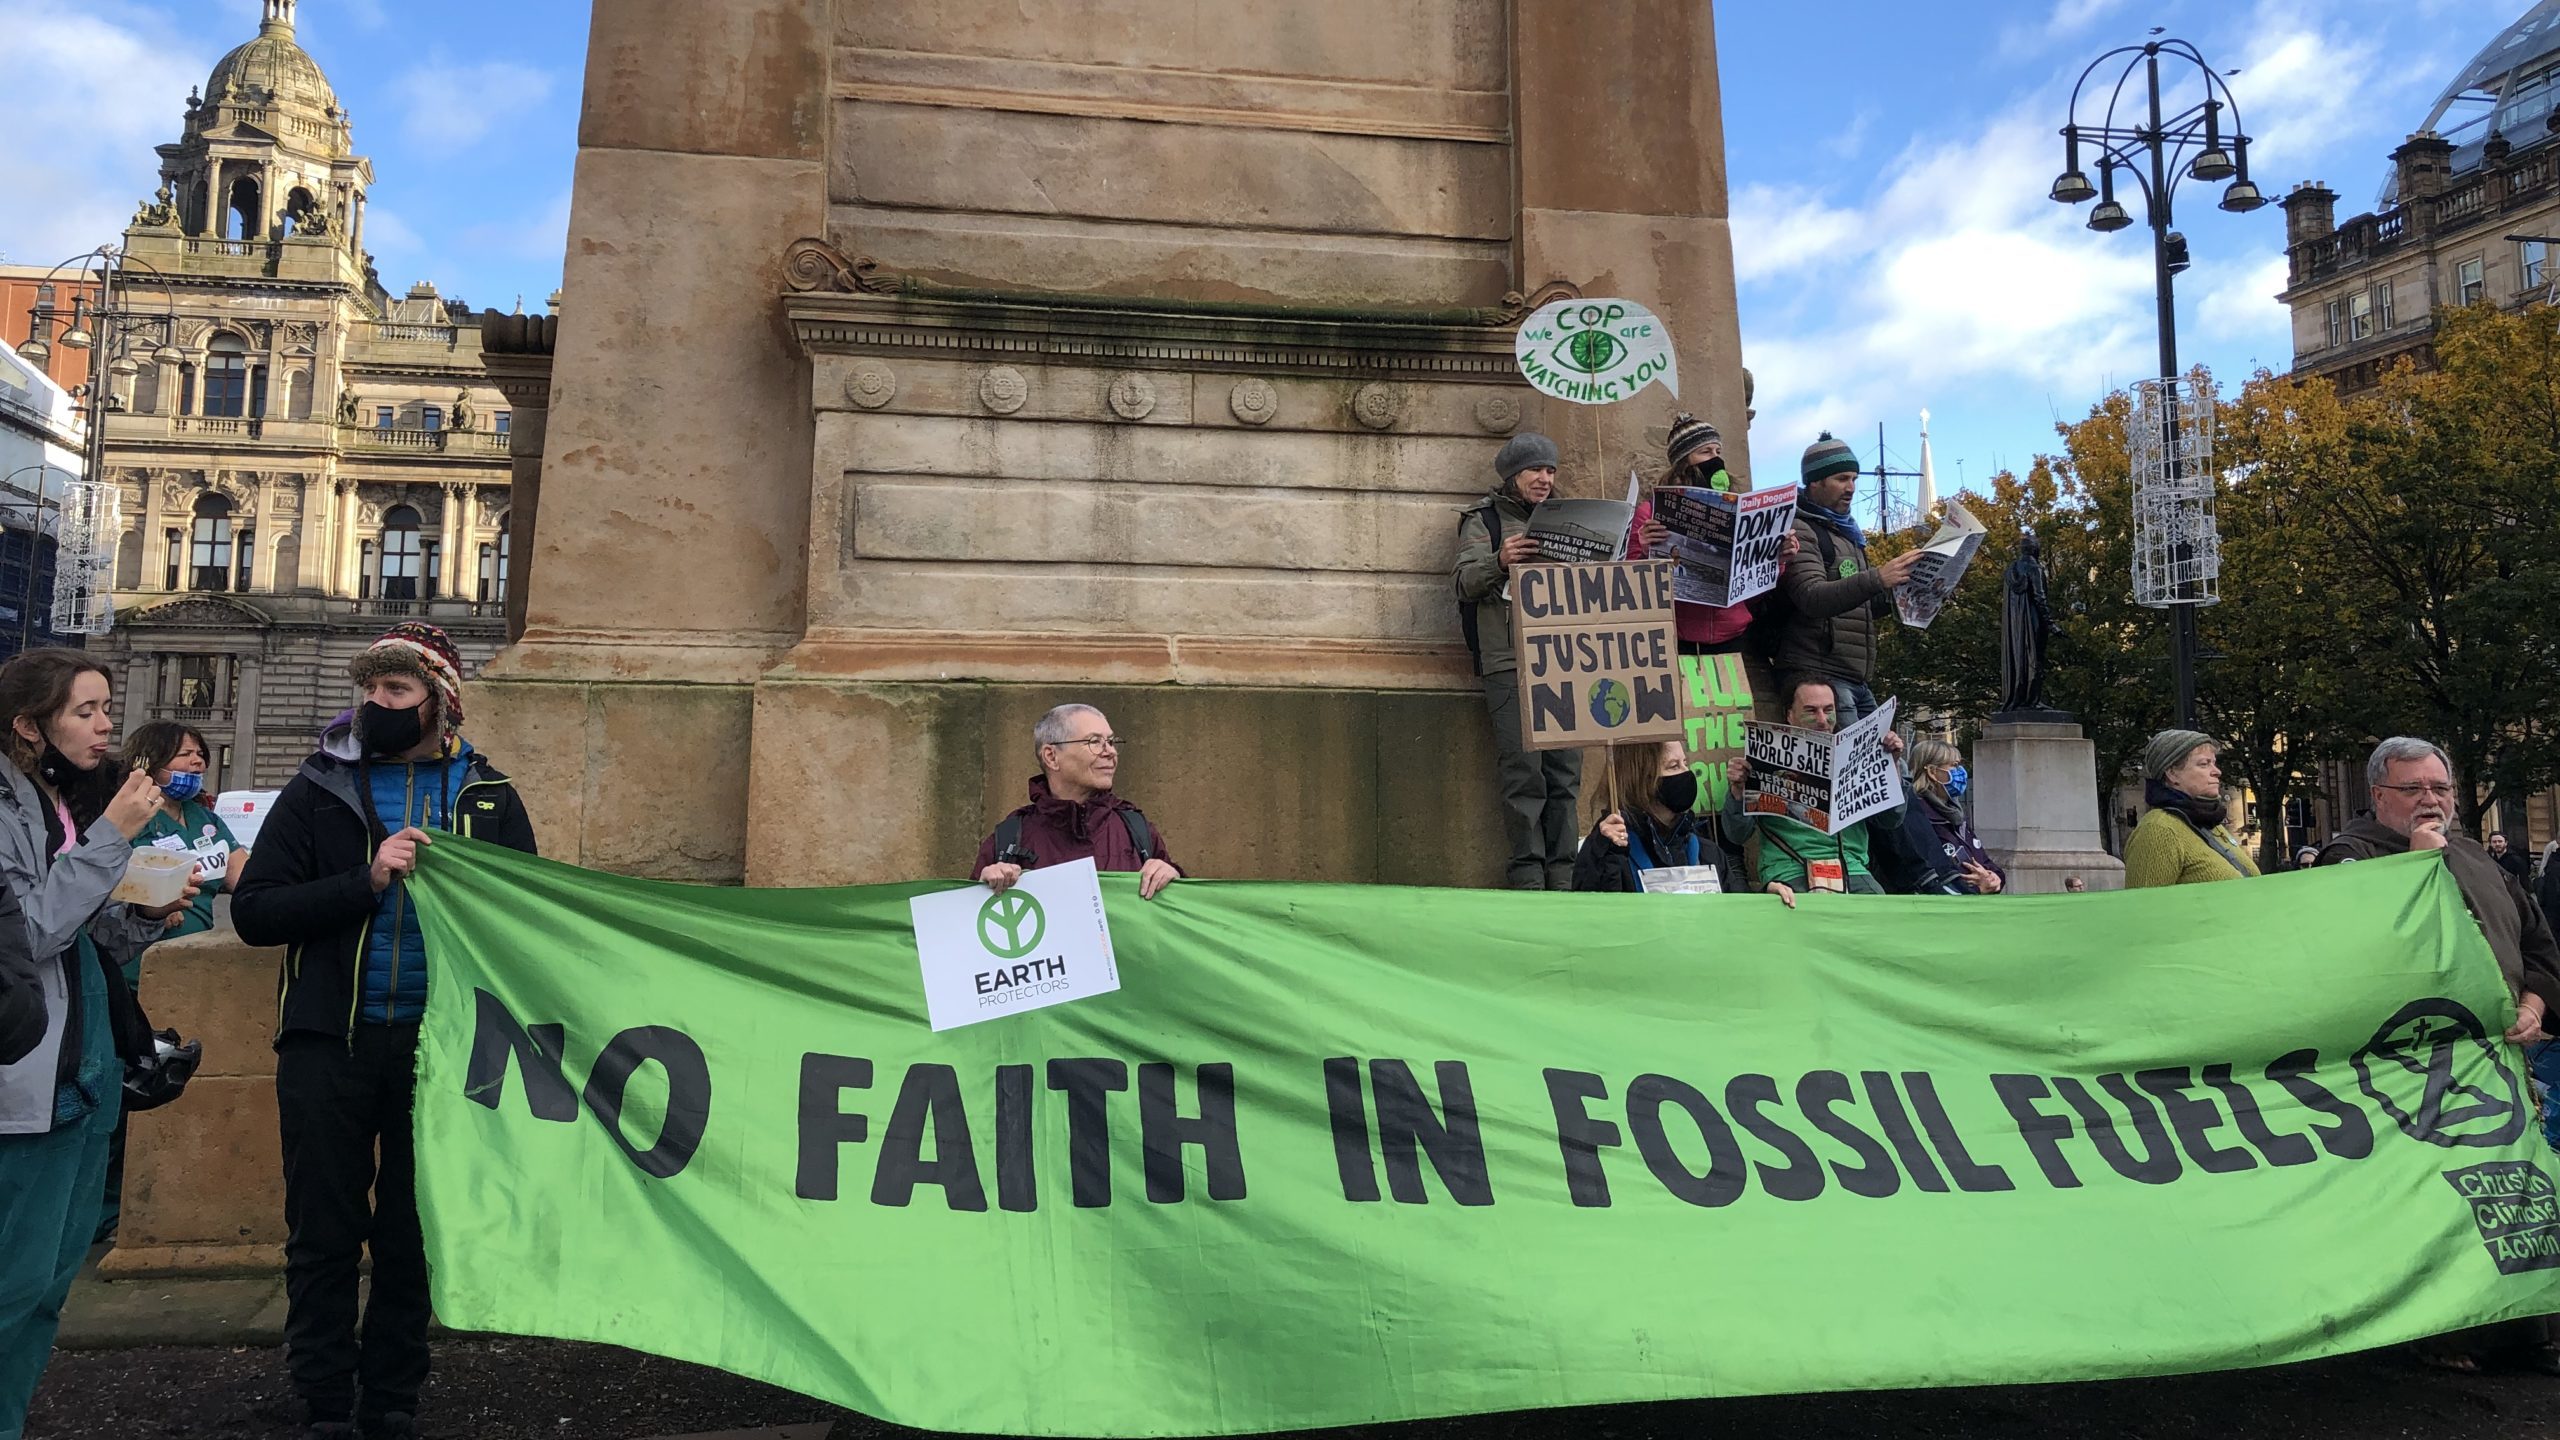 Protesters holding a banner that reads: "No faith in fossil fuels"